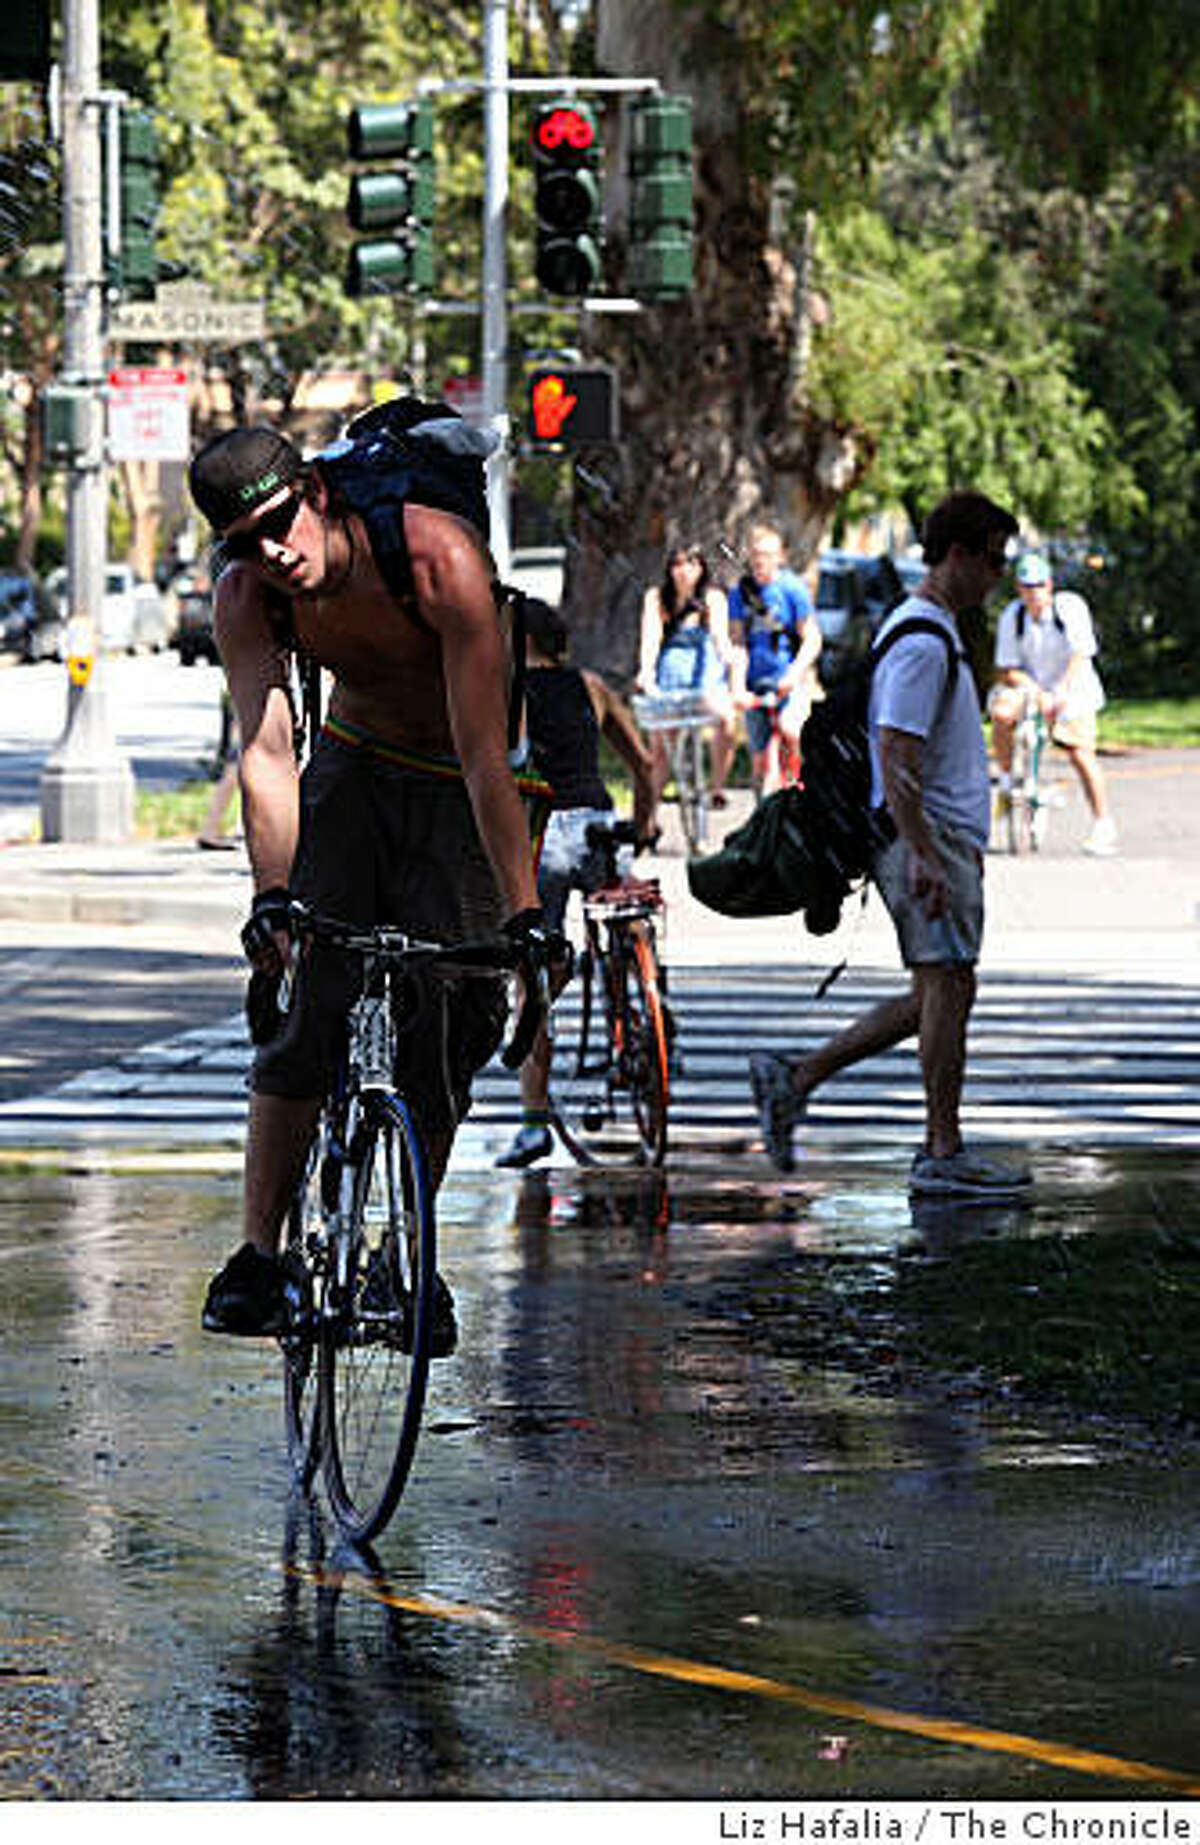 Cyclists going through water sprinklers on Fell at Masonic streets in San Francisco, Calif., on Friday, April 17, 2009.